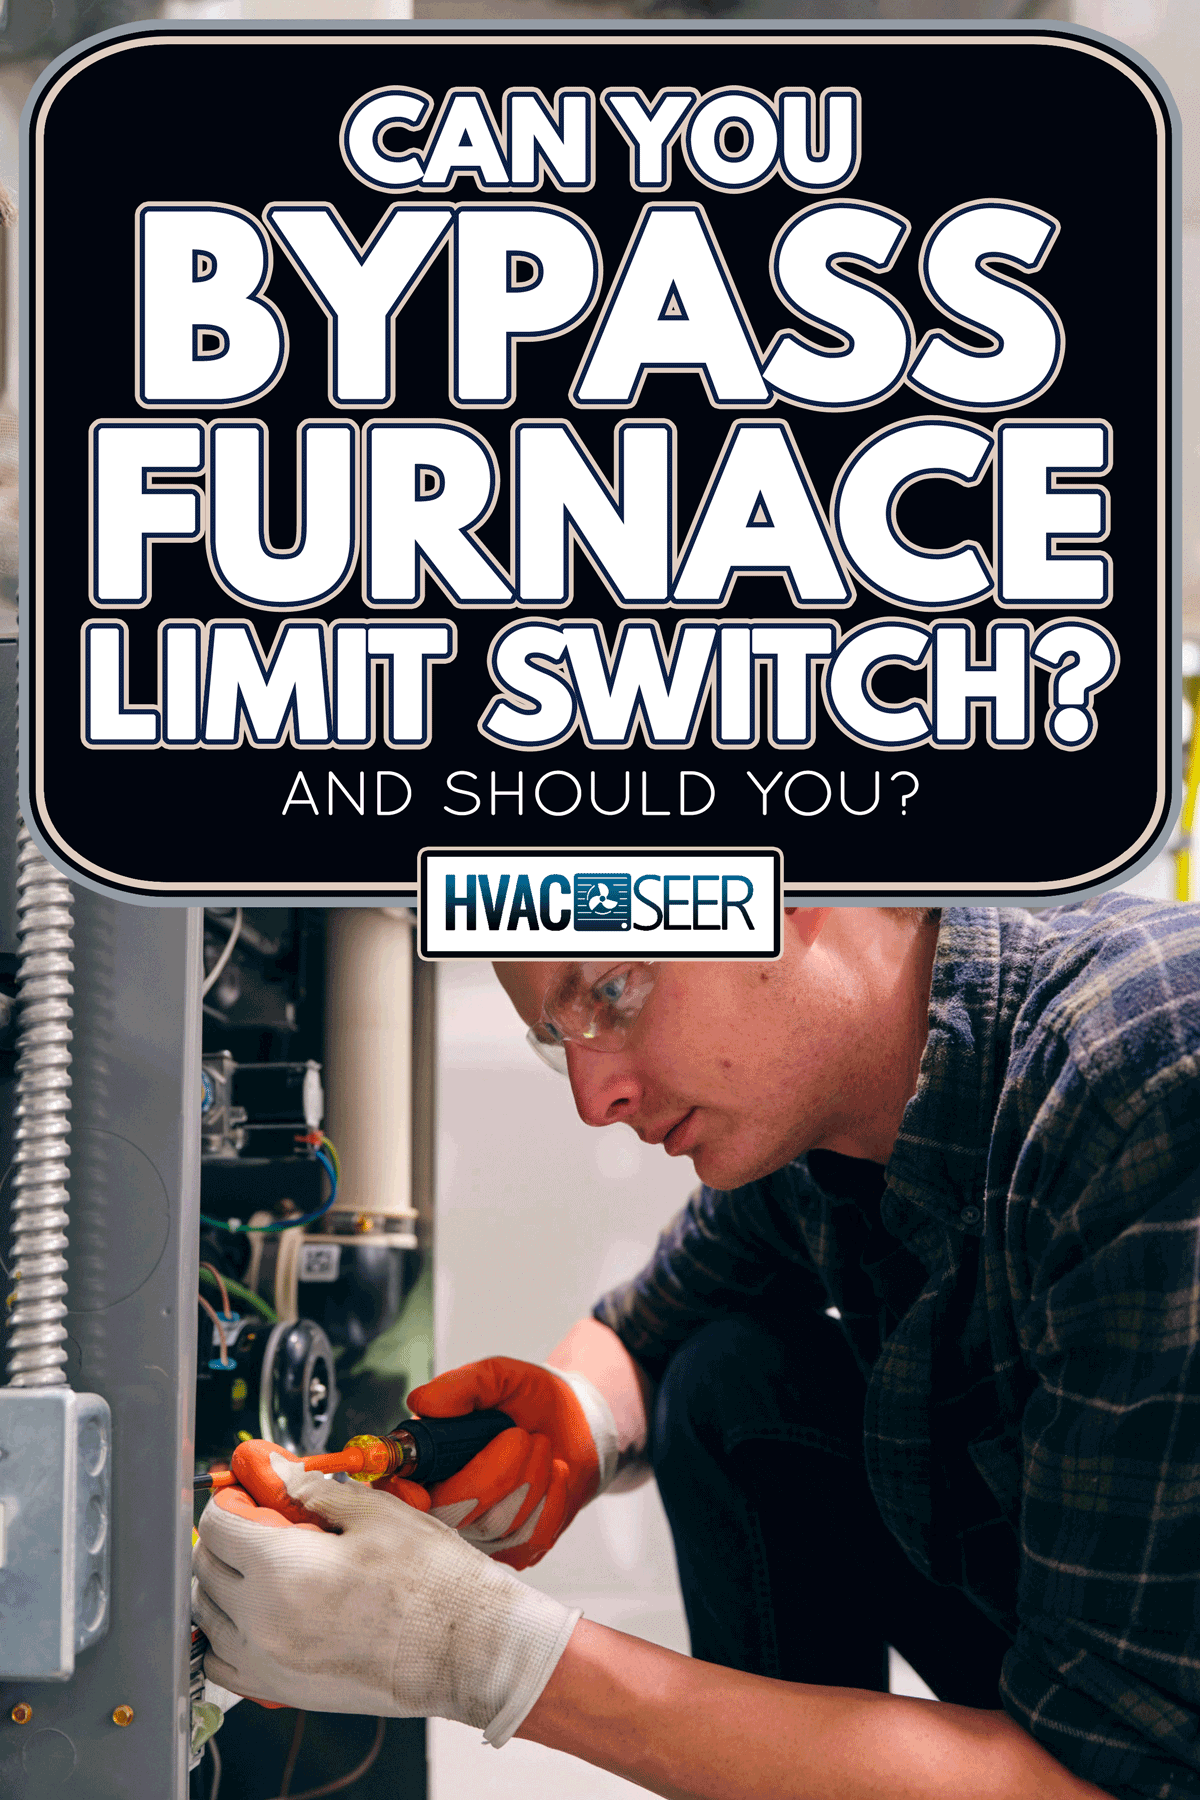 Man repairing a furnace, Can You Bypass Furnace Limit Switch? [And Should You?]